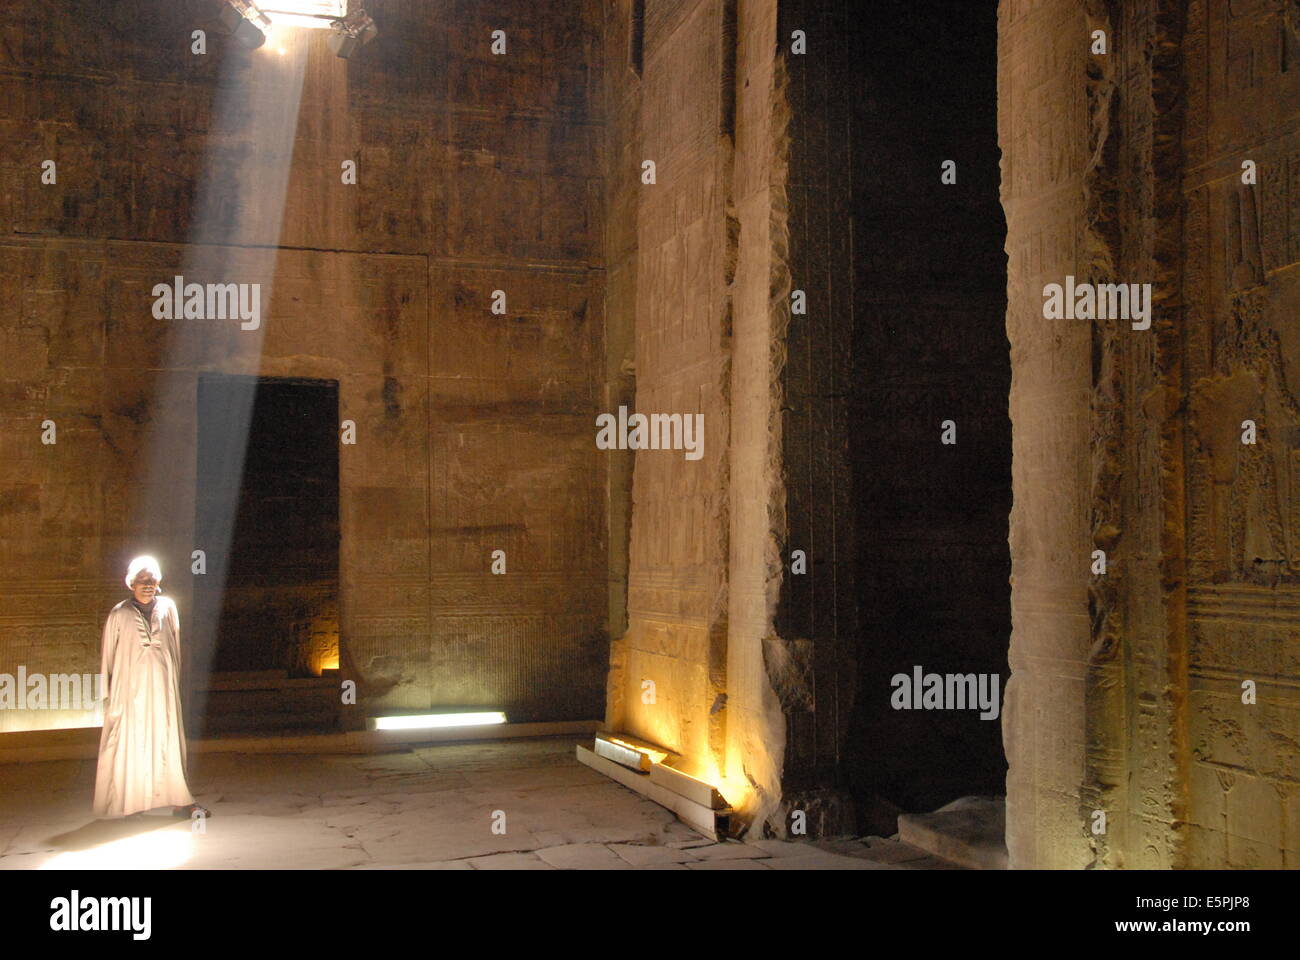 The Outer Hypostyle Hall in the Temple of Hathor, Dendera necropolis, Qena, Nile Valley, Egypt, North Africa, Africa Stock Photo